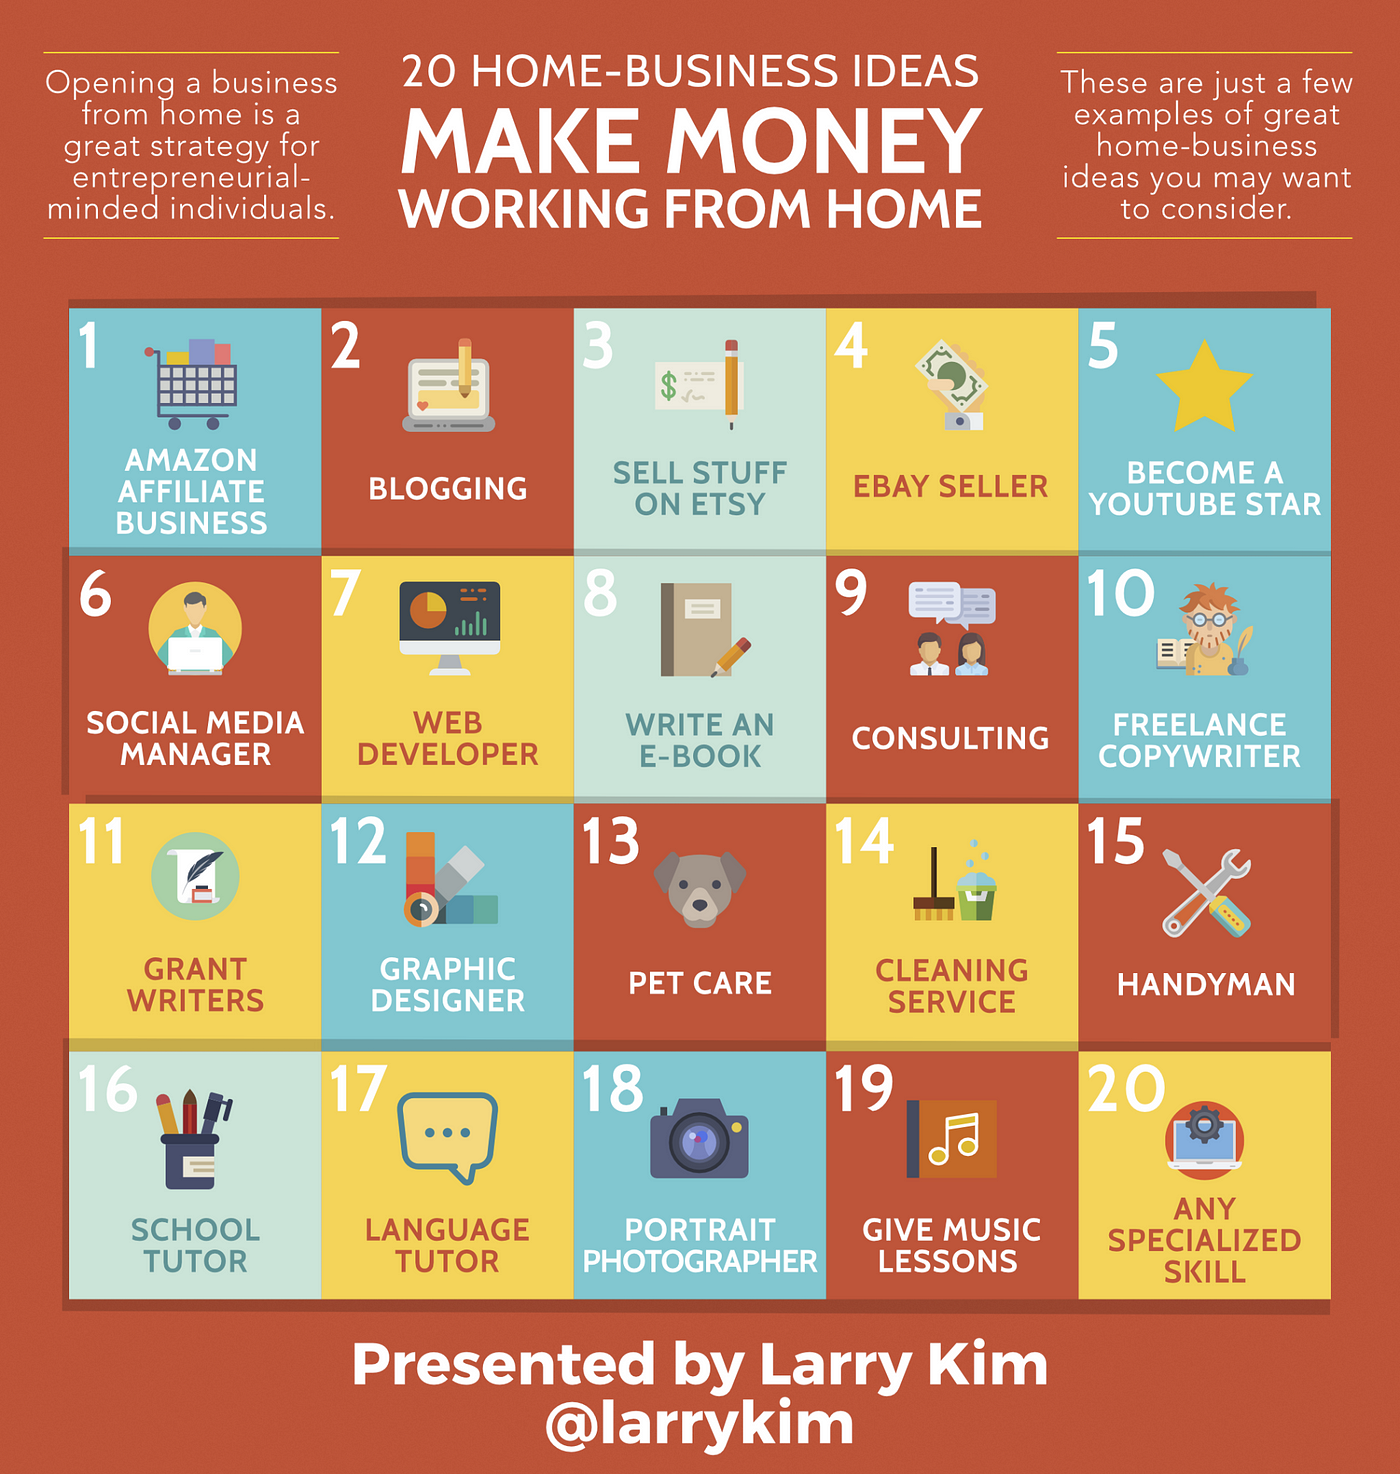 20 Home-Business Ideas: Make Money Working From Home, by Larry Kim, Mission.org